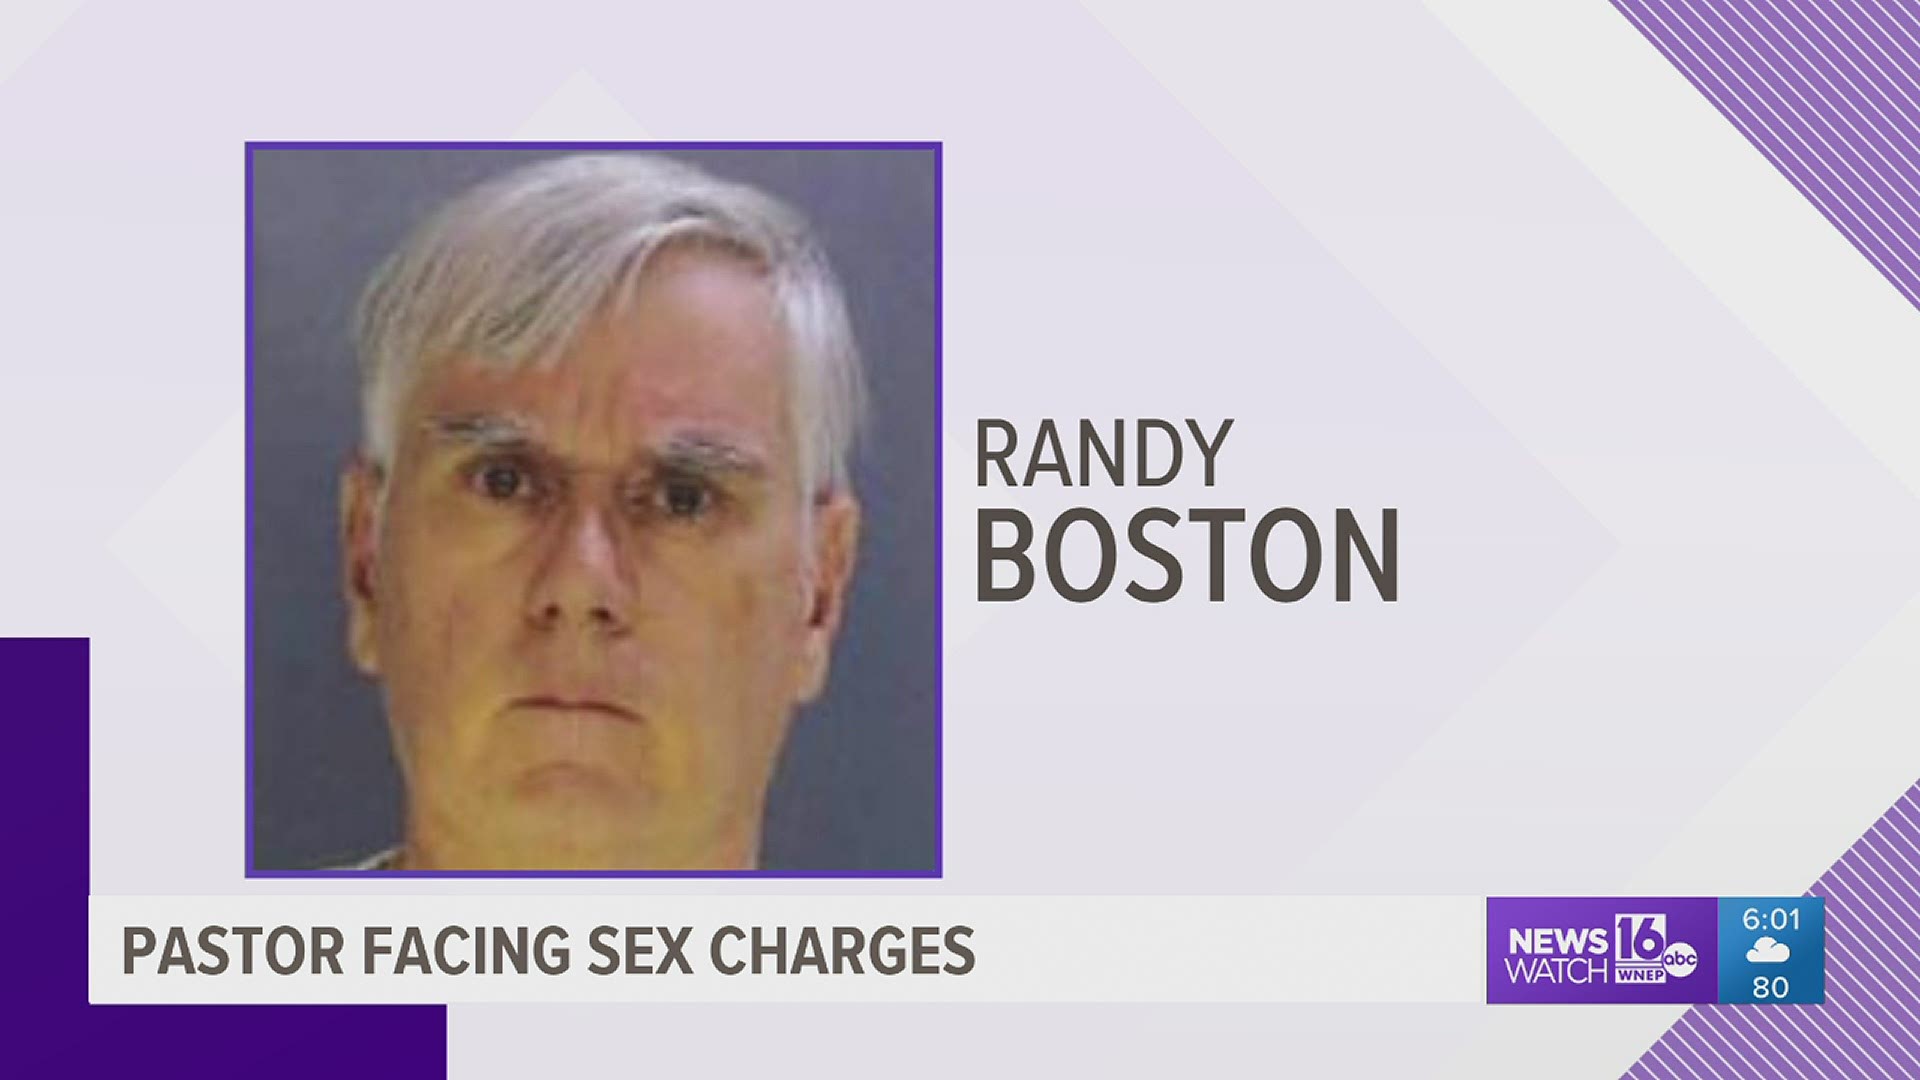 Randy Boston allegedly sexually assaulted a first-grade student in 2008 while he was a teacher at a Christian school in Chester County.